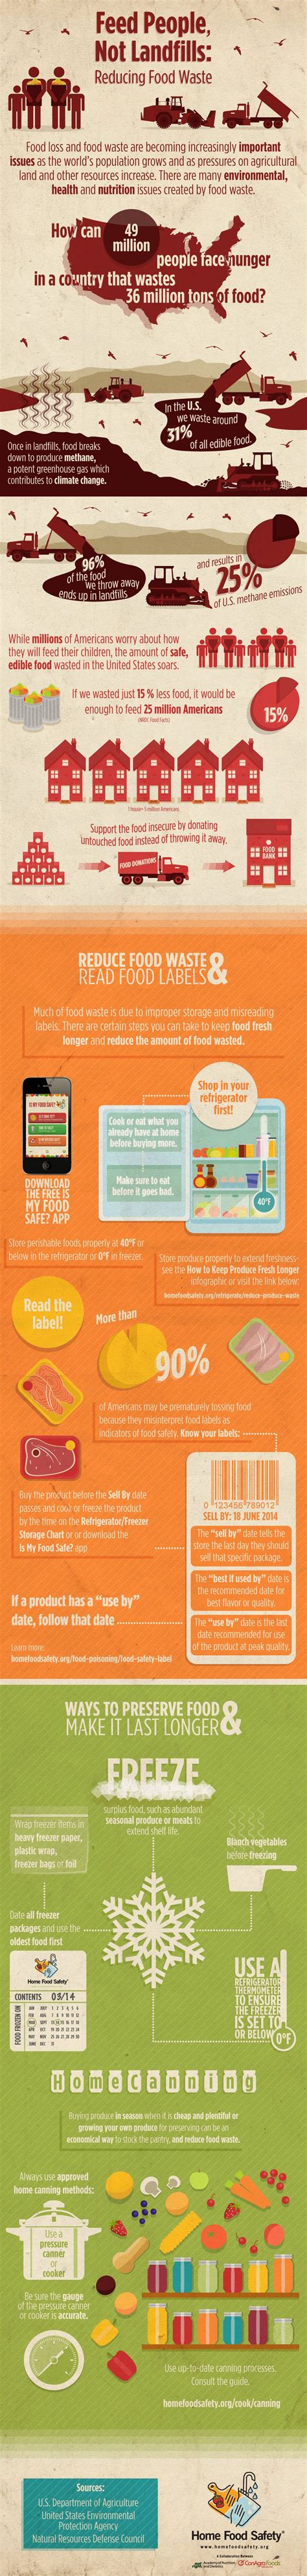 Food Waste Infographic, Recycling Facts, Waste Reduction, World Hunger, Food Insecurity, Food ...